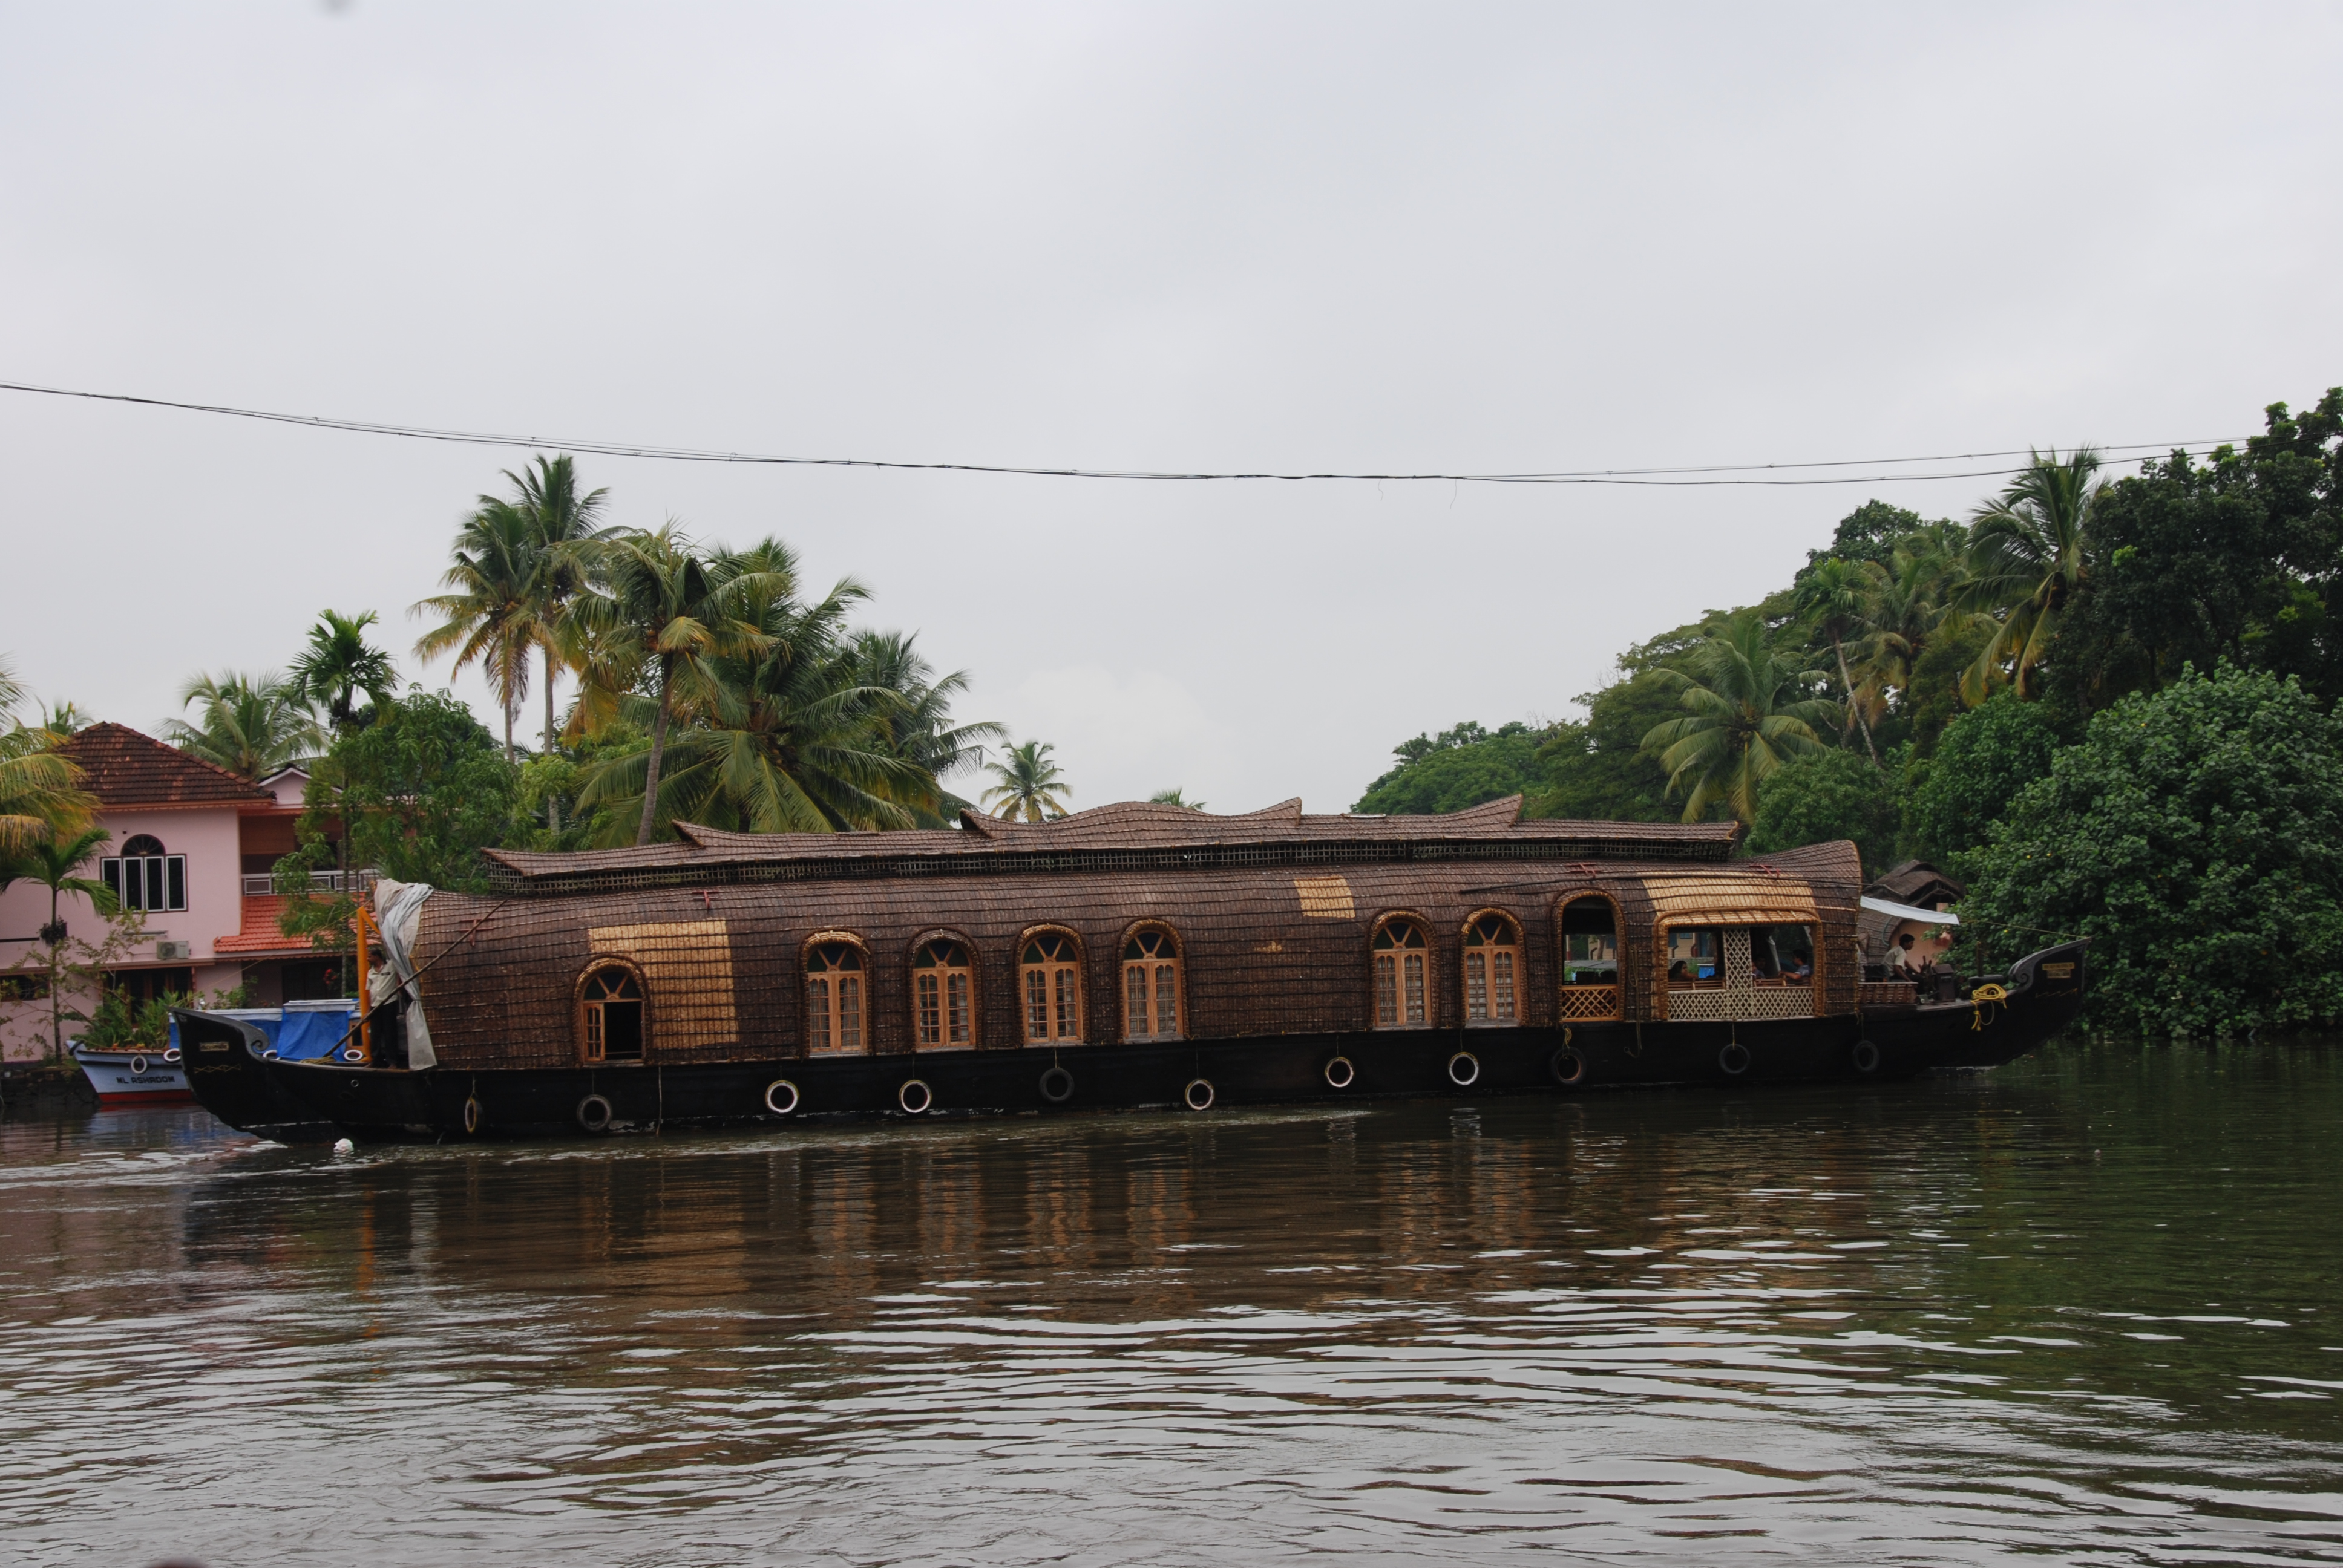 Outside Suburbia - What to expect on a houseboat in Alleppey, Kerala